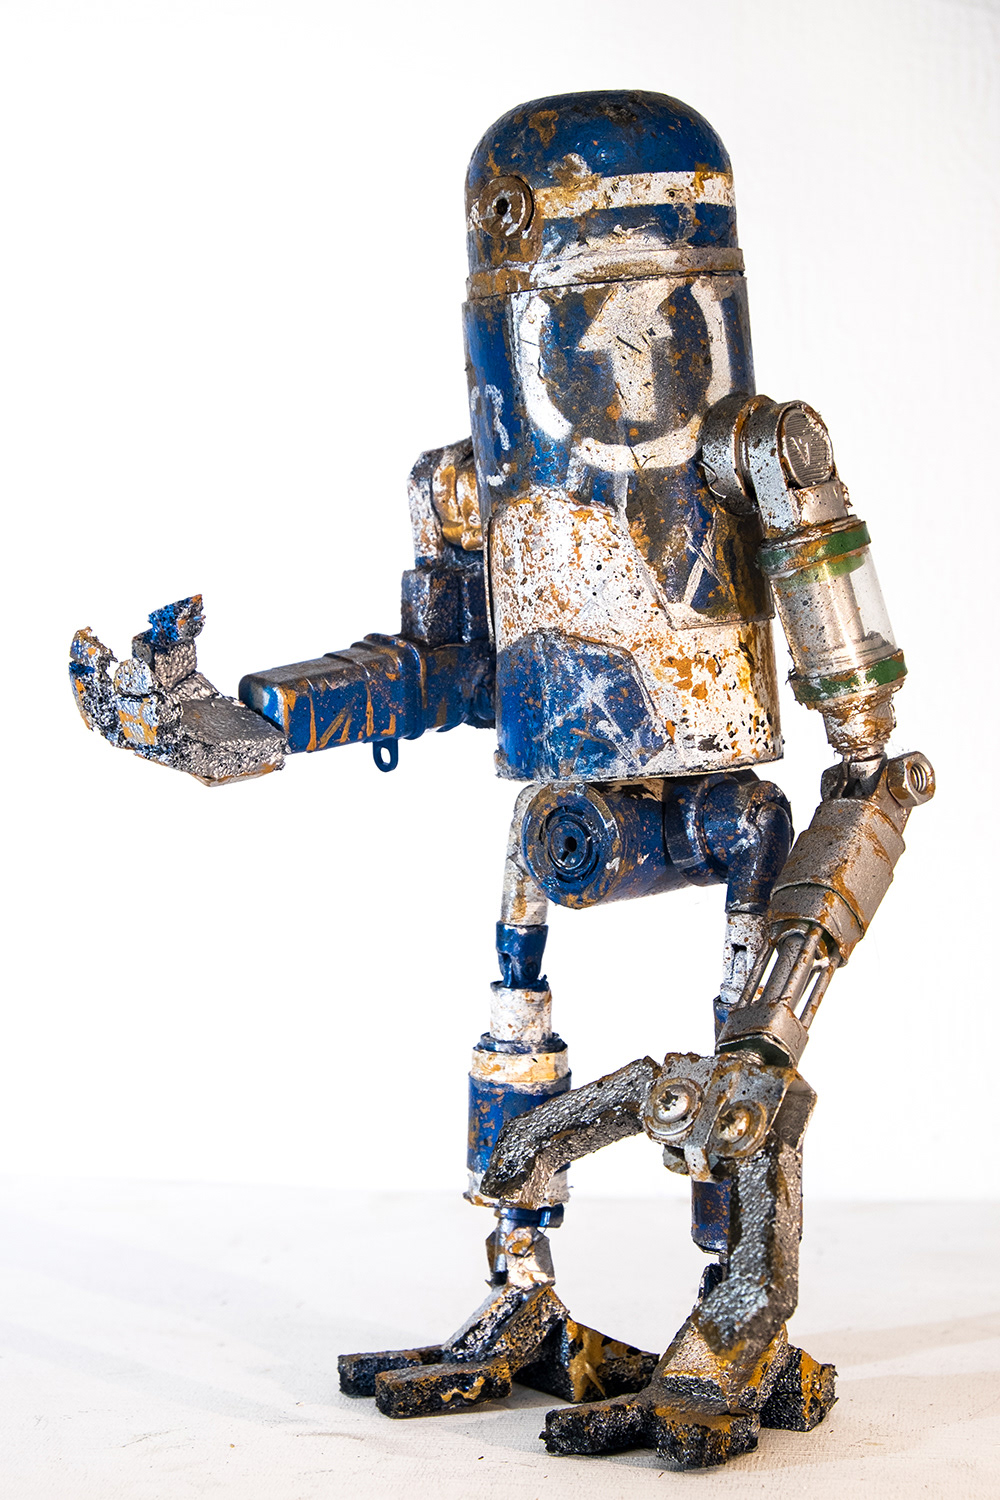 Labadanzky Ashley Wood handmade recycled material streetart robot toy